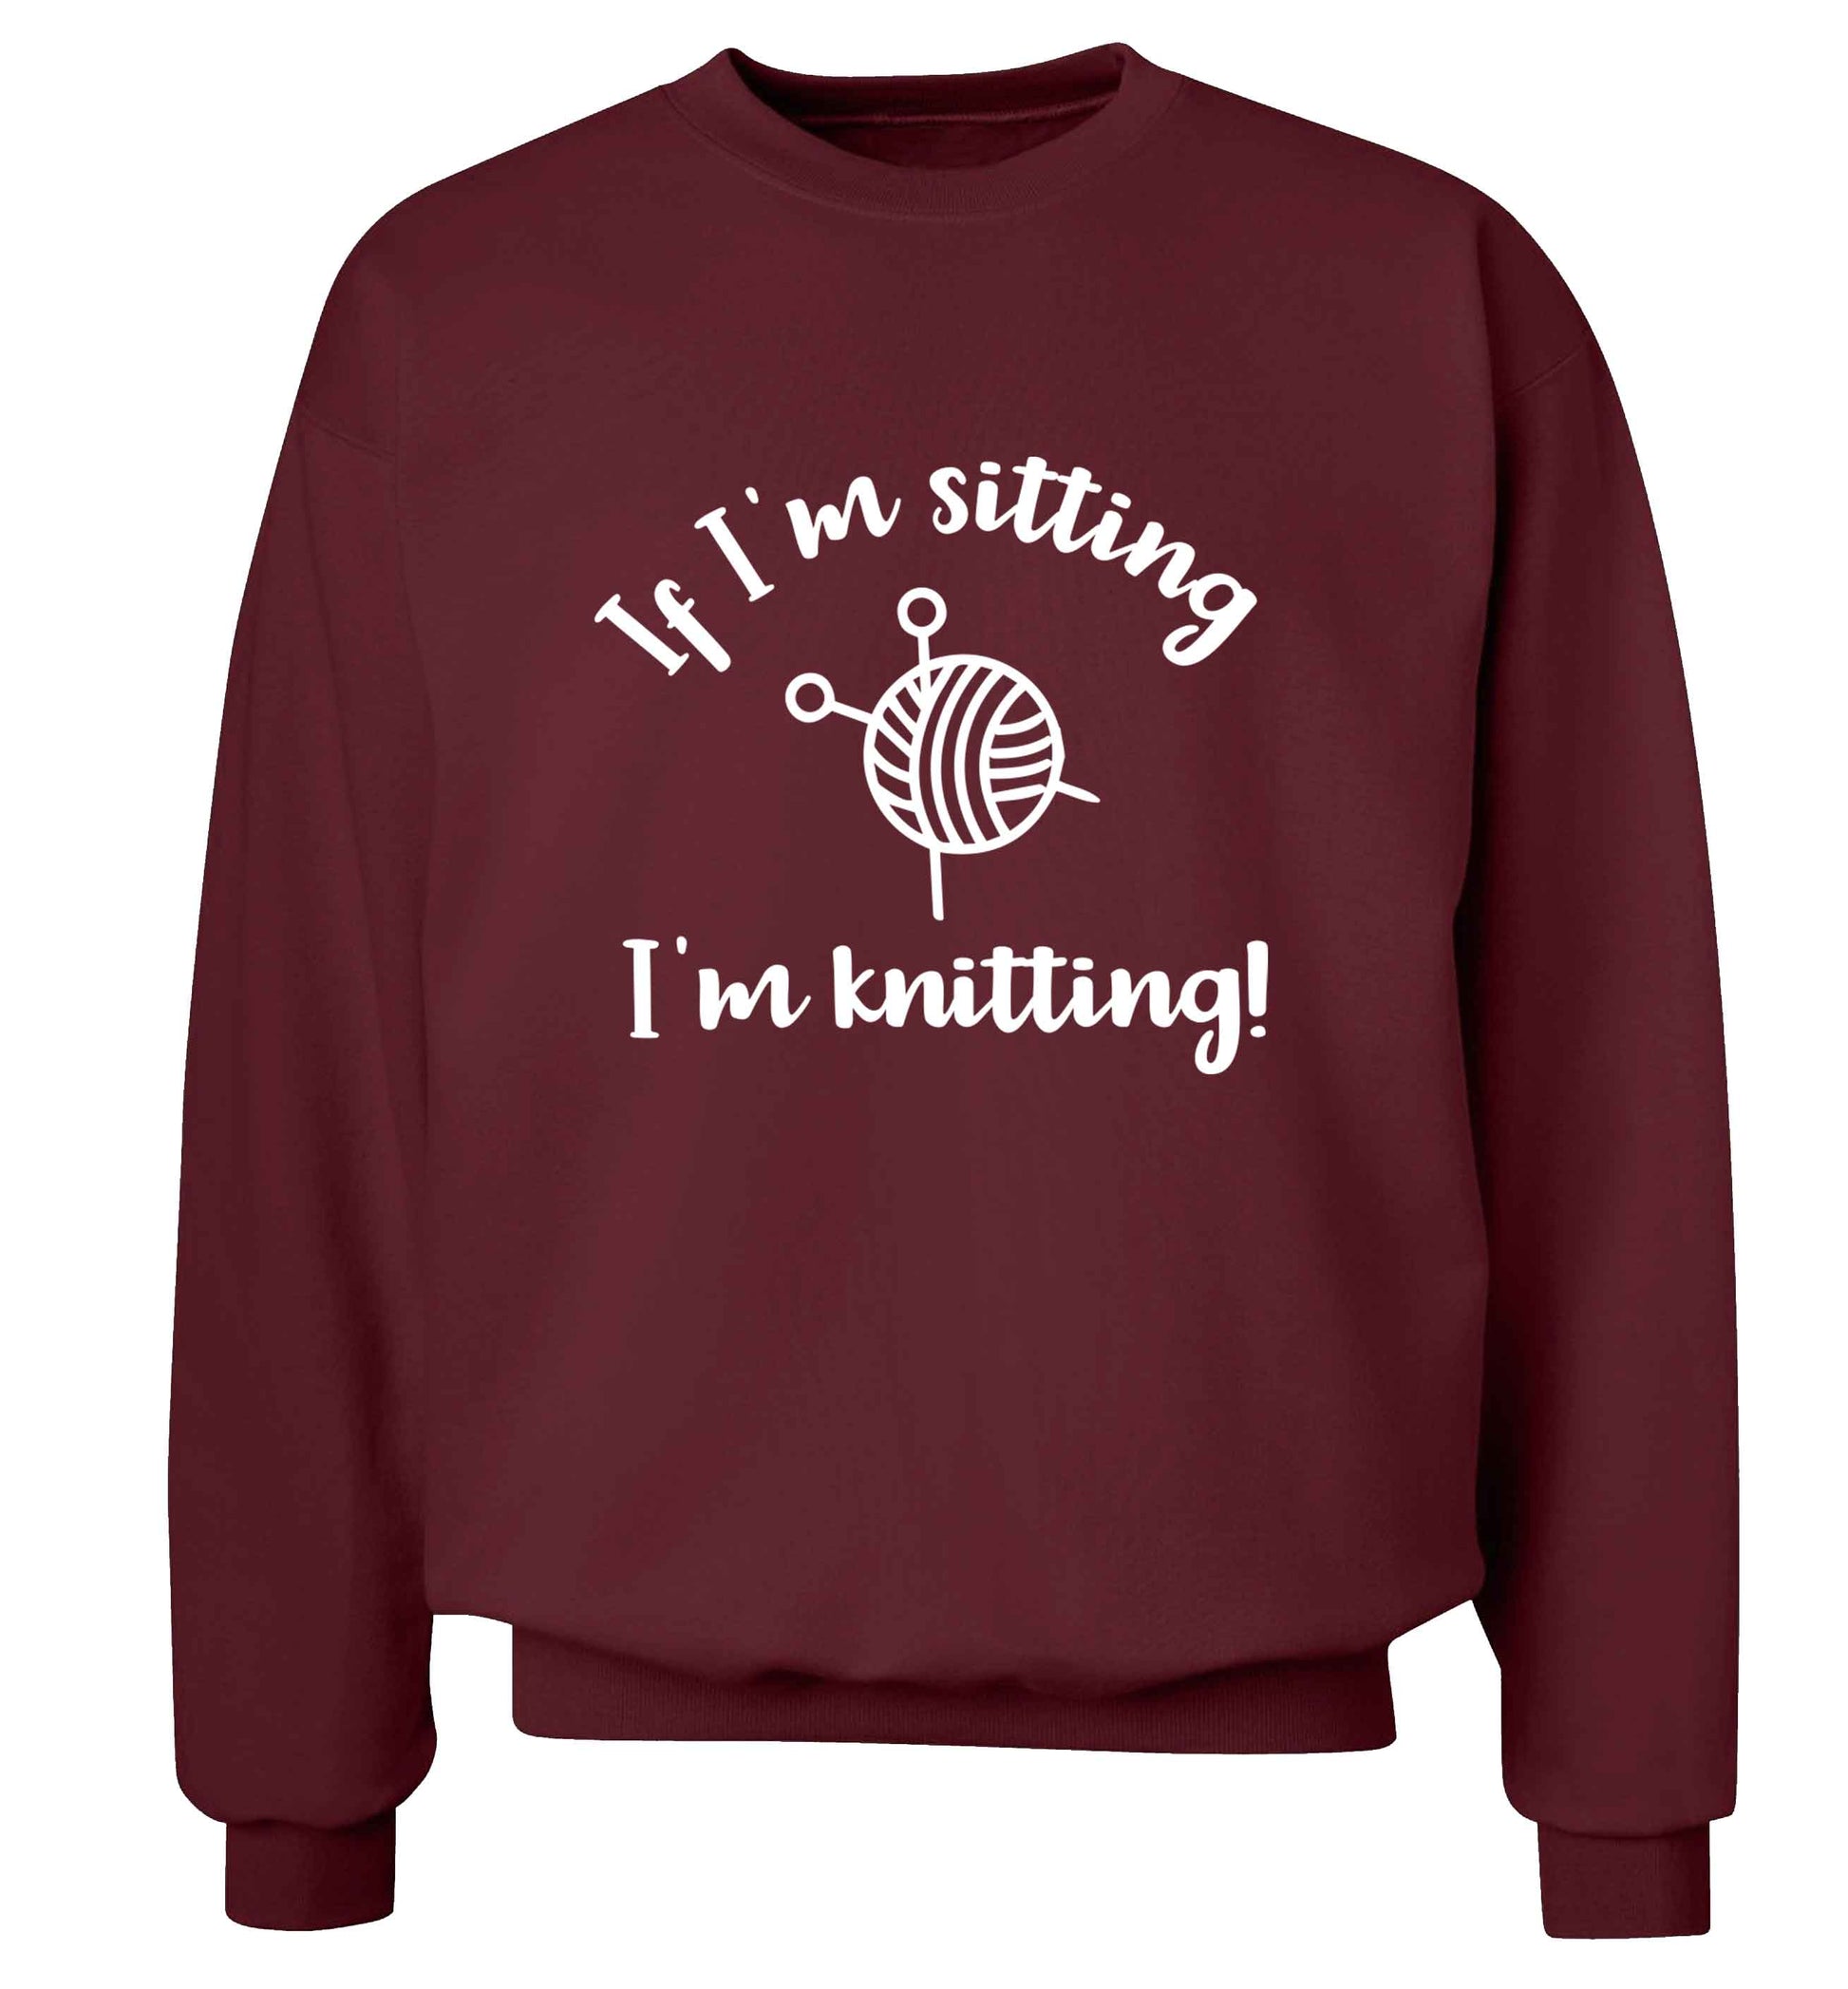 Merry Christmas adult's unisex maroon sweater 2XL